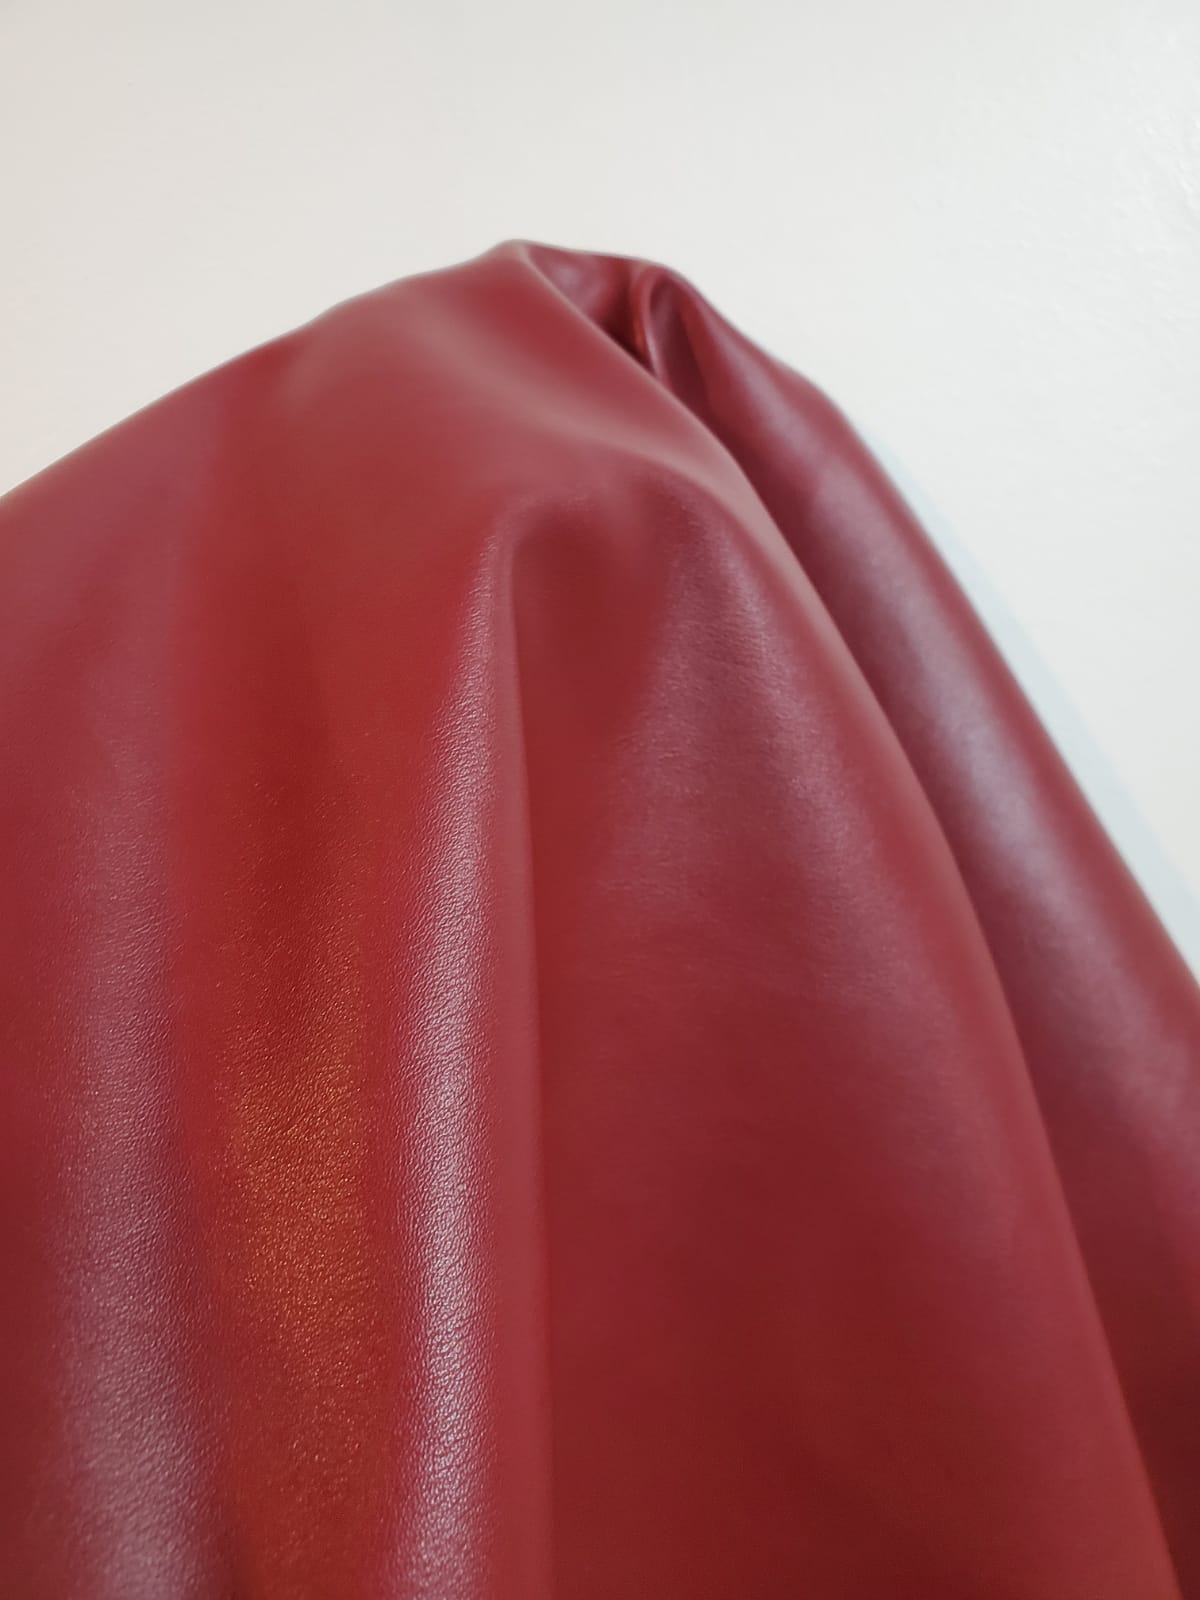  Faux vegan leather by the yard sheets distressed leather fabric for upholstery 30,000 Double Rubs vinyl sheets nappa leather crafts bookbinding books furniture fabrics uphilstery fuax material pu pleather faiux learher cruelty free nappa seat burgundy red maroon